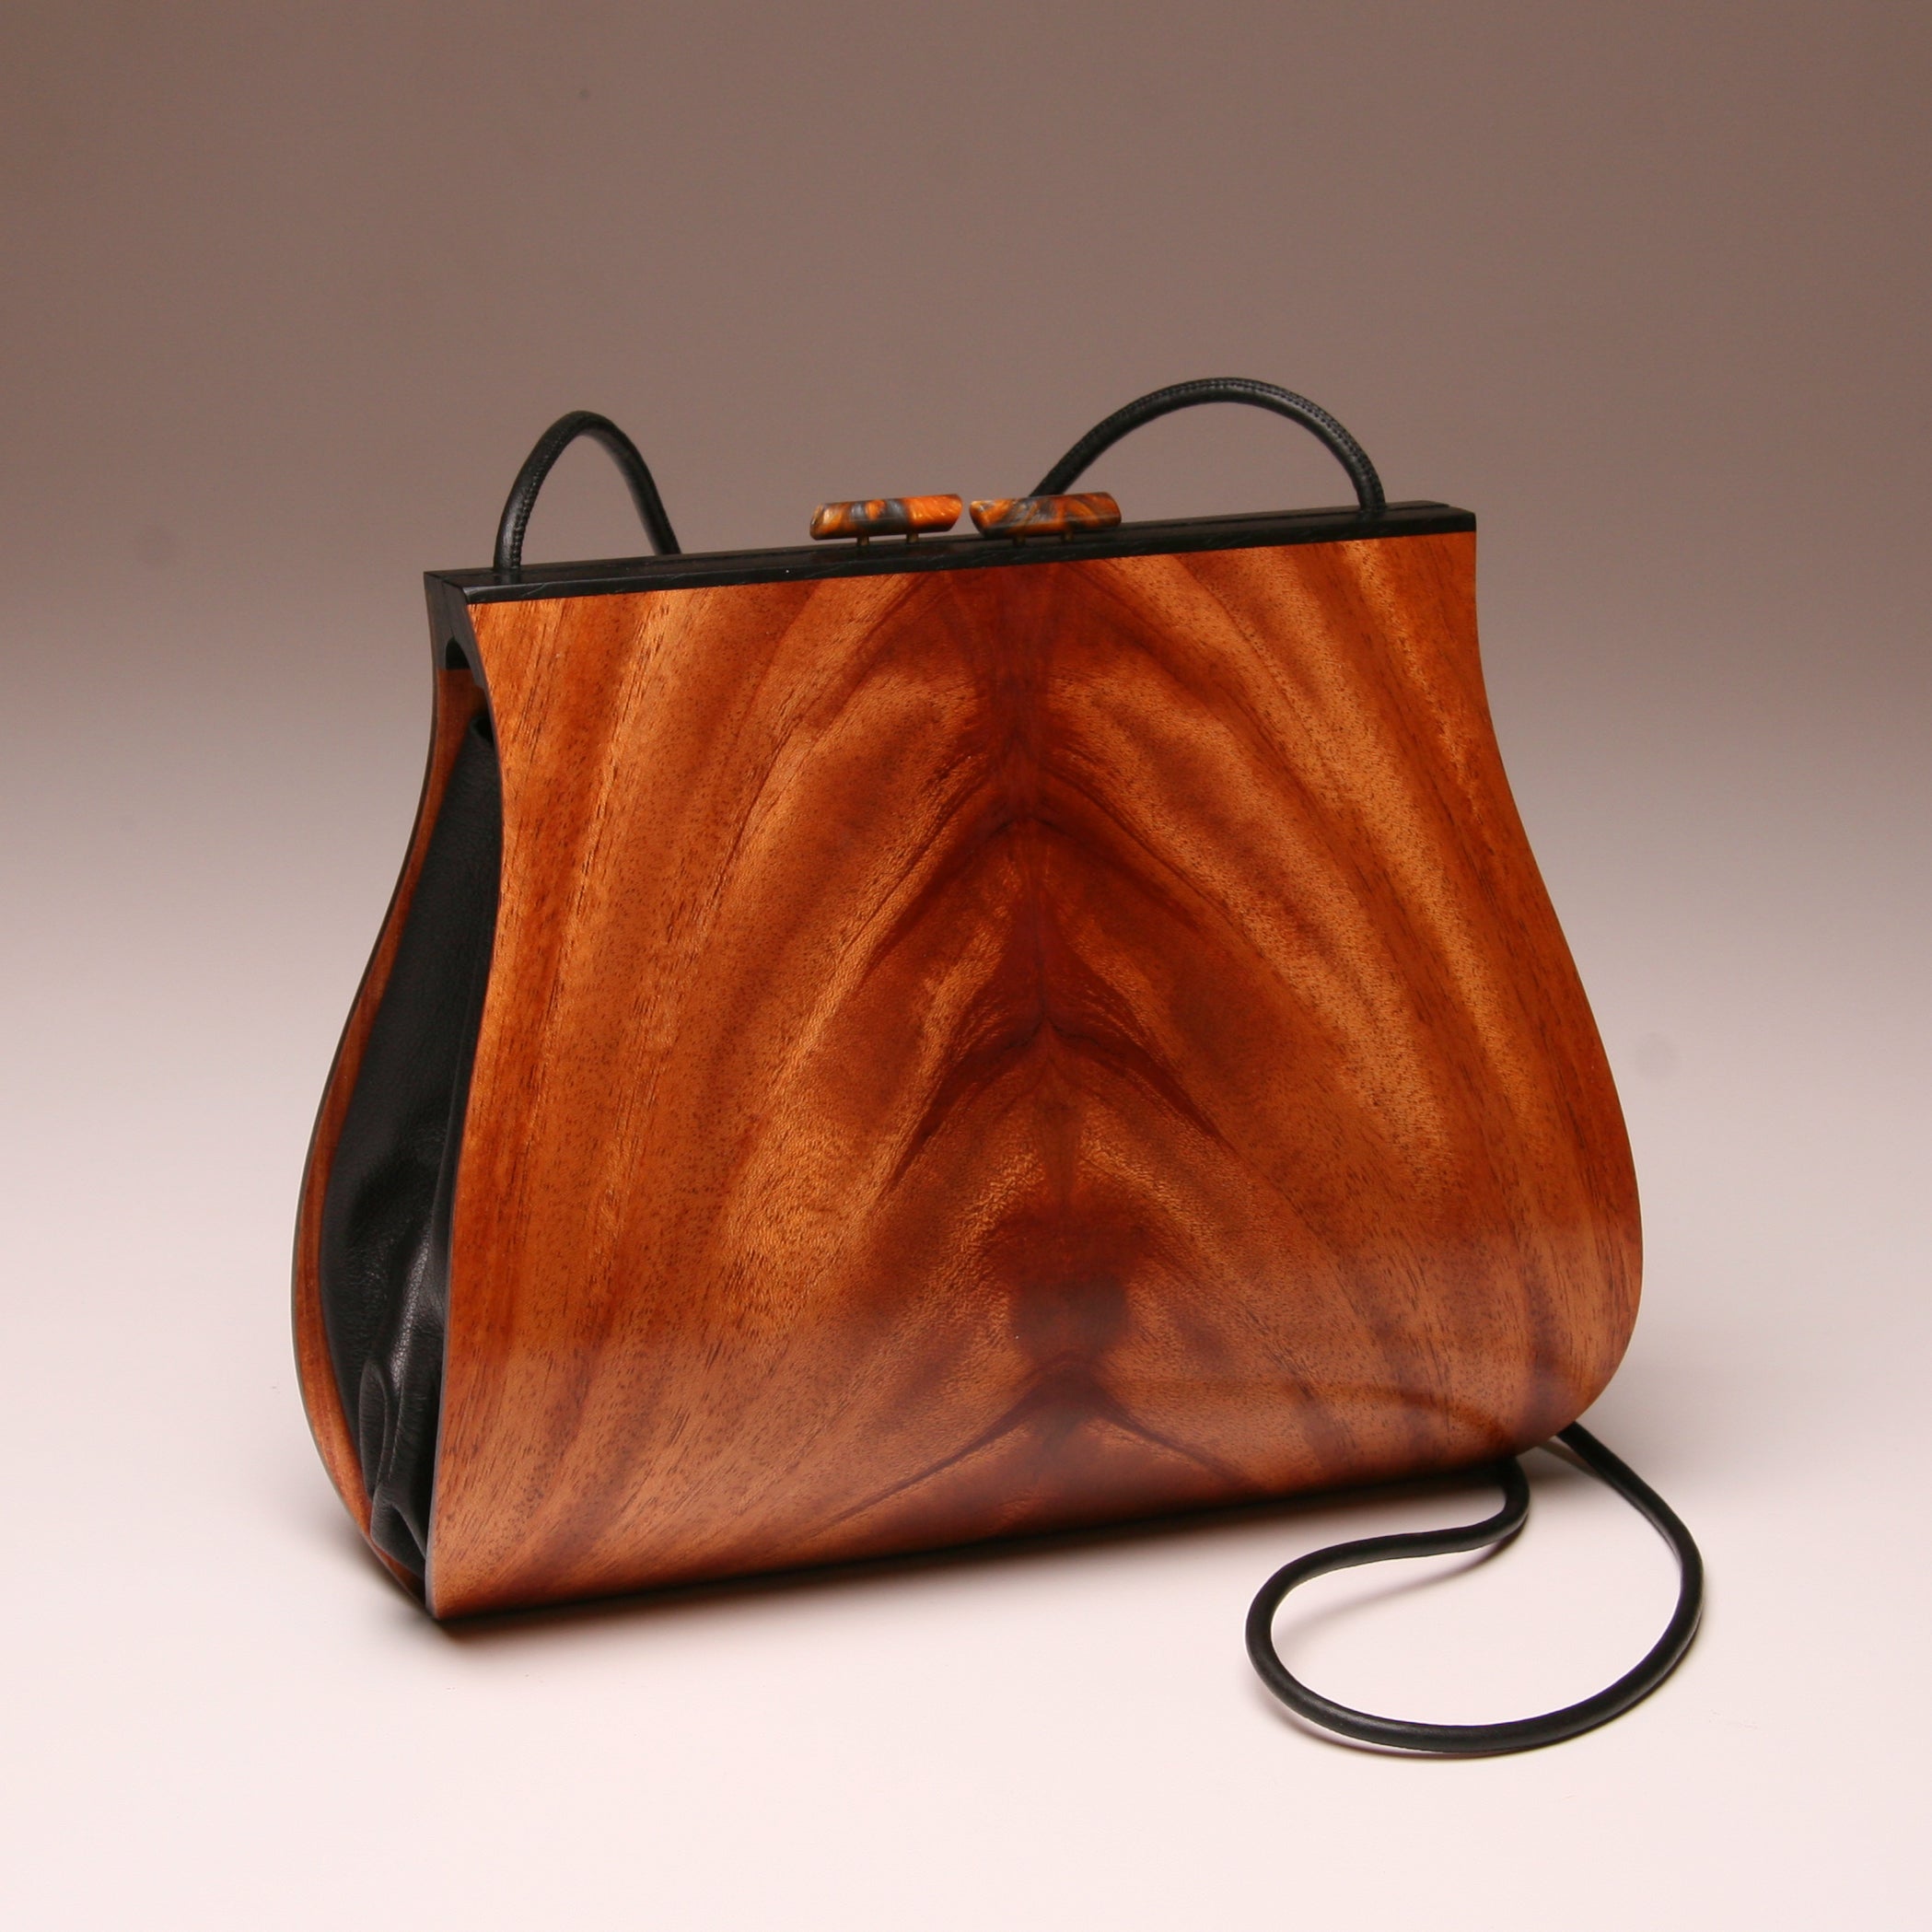 "Dianella" Large Handbag-Single Strap - Book-Matched Mahogany Crotch (Now taking orders to ship in approx. 3-4 weeks))